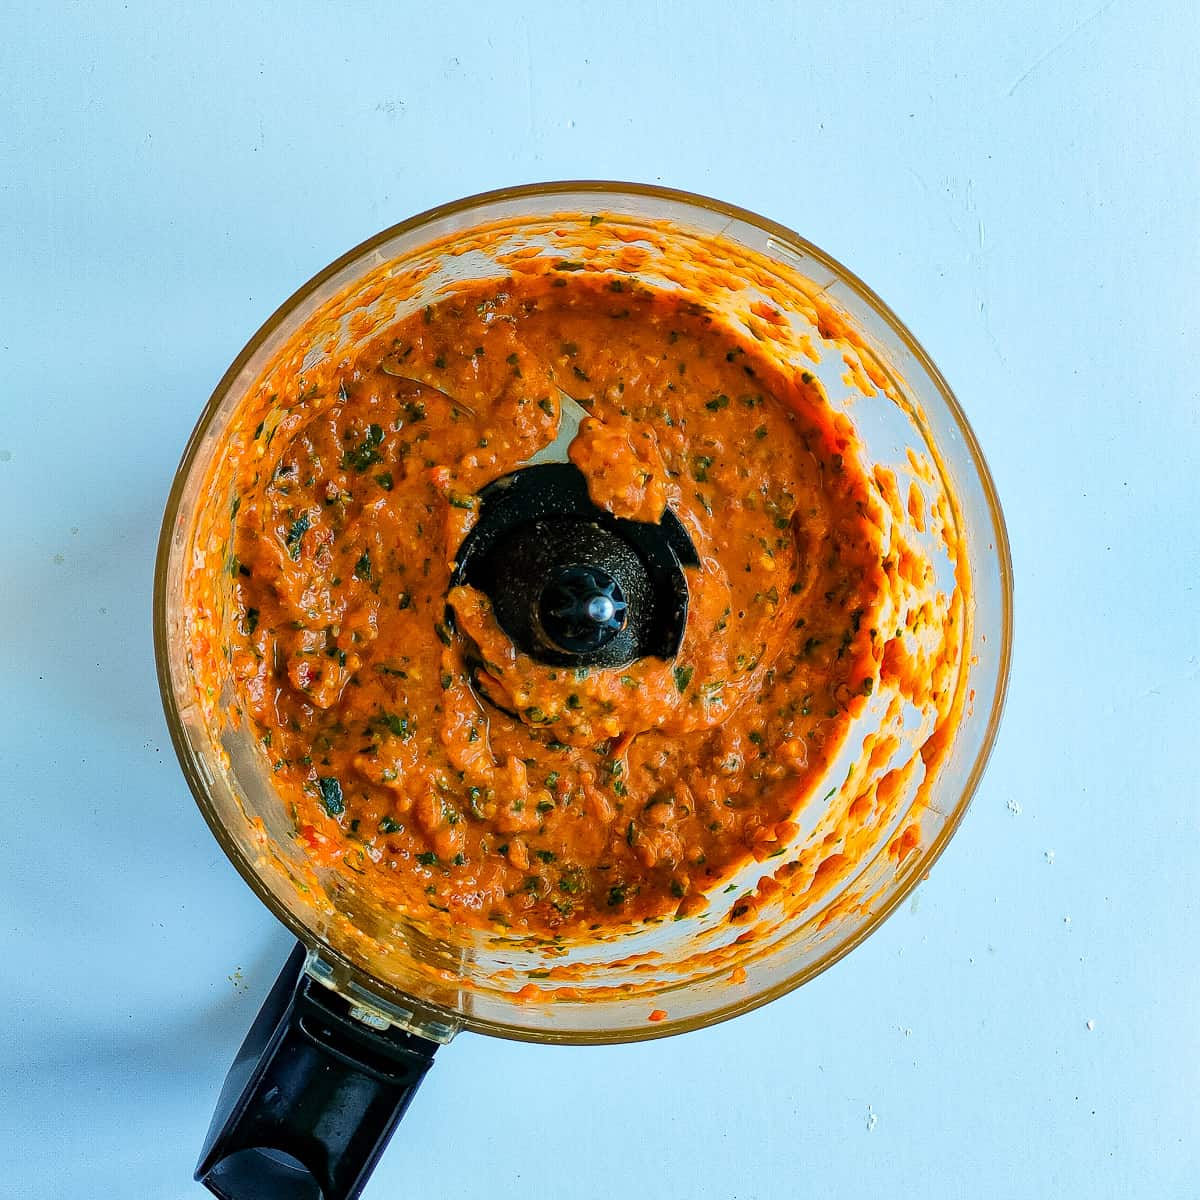 Blended chilli and basil pesto in a food processor jar.